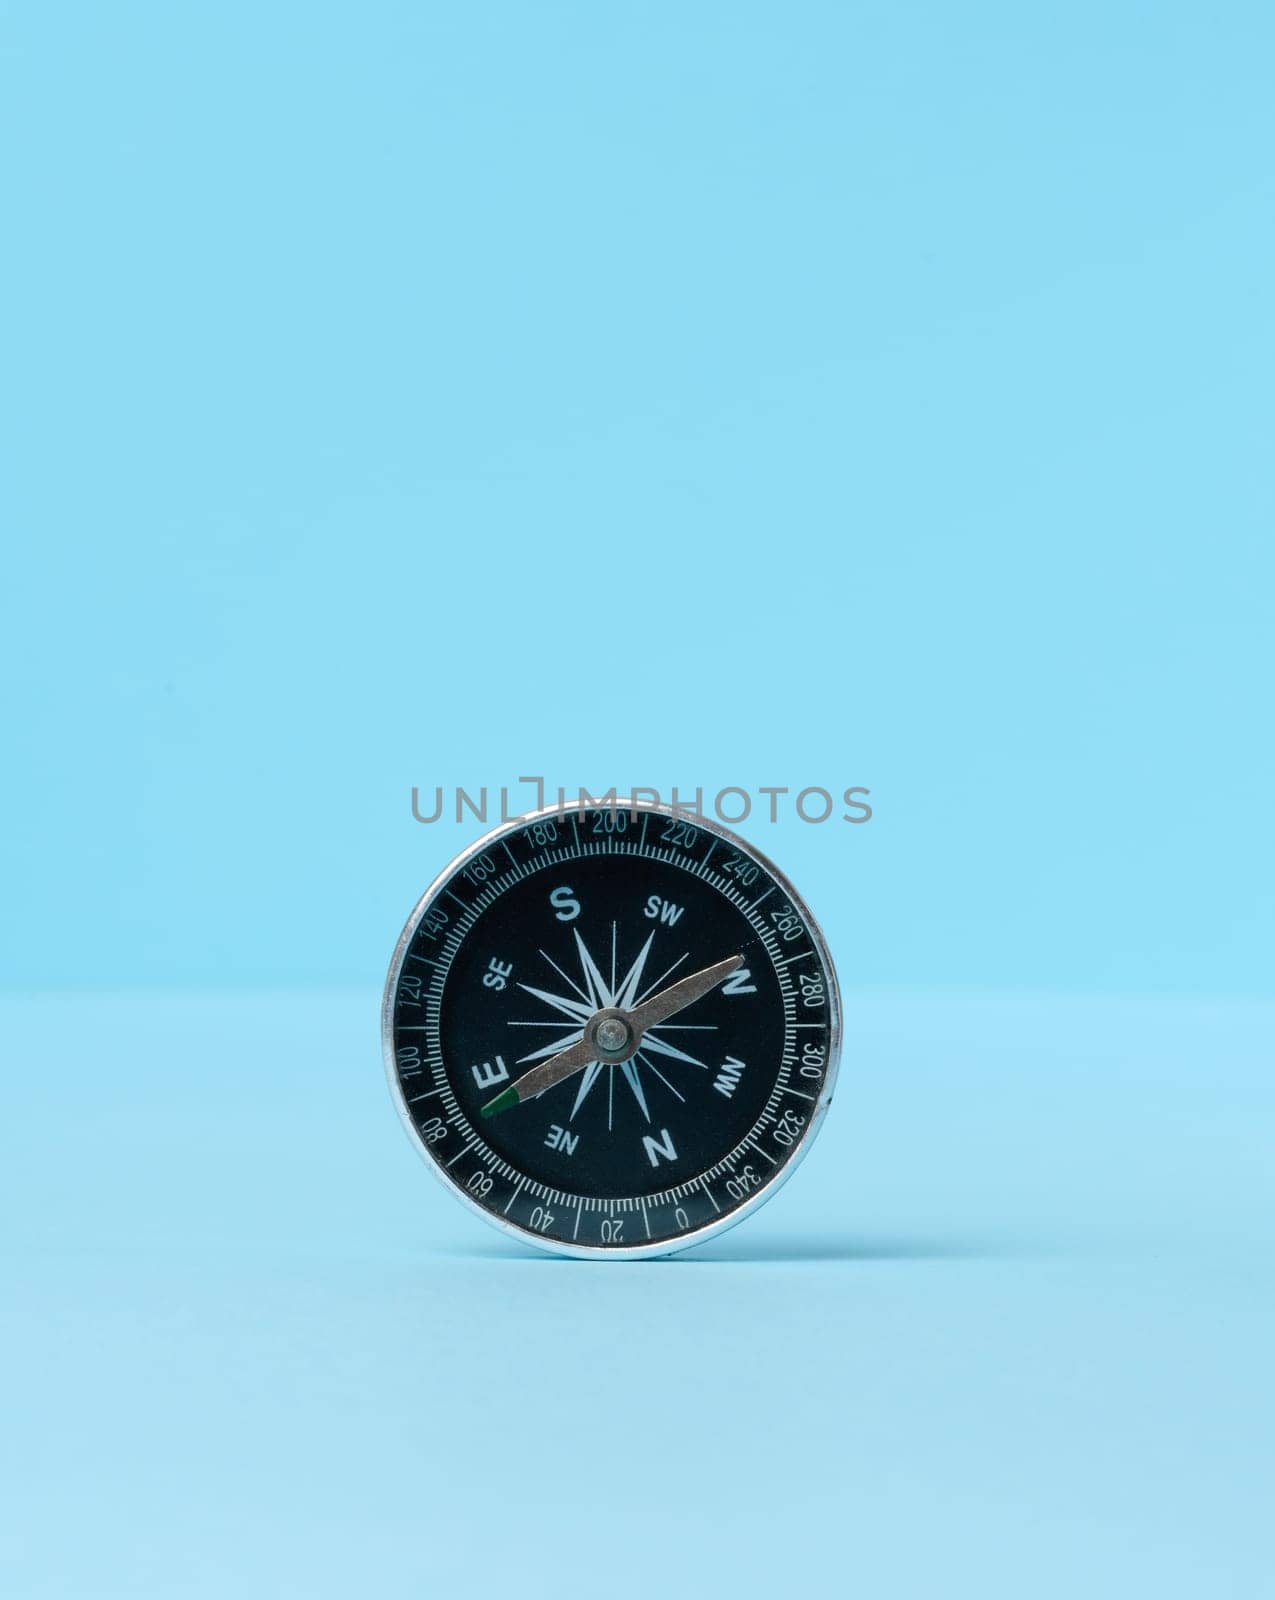 Round compass on a blue background by ndanko